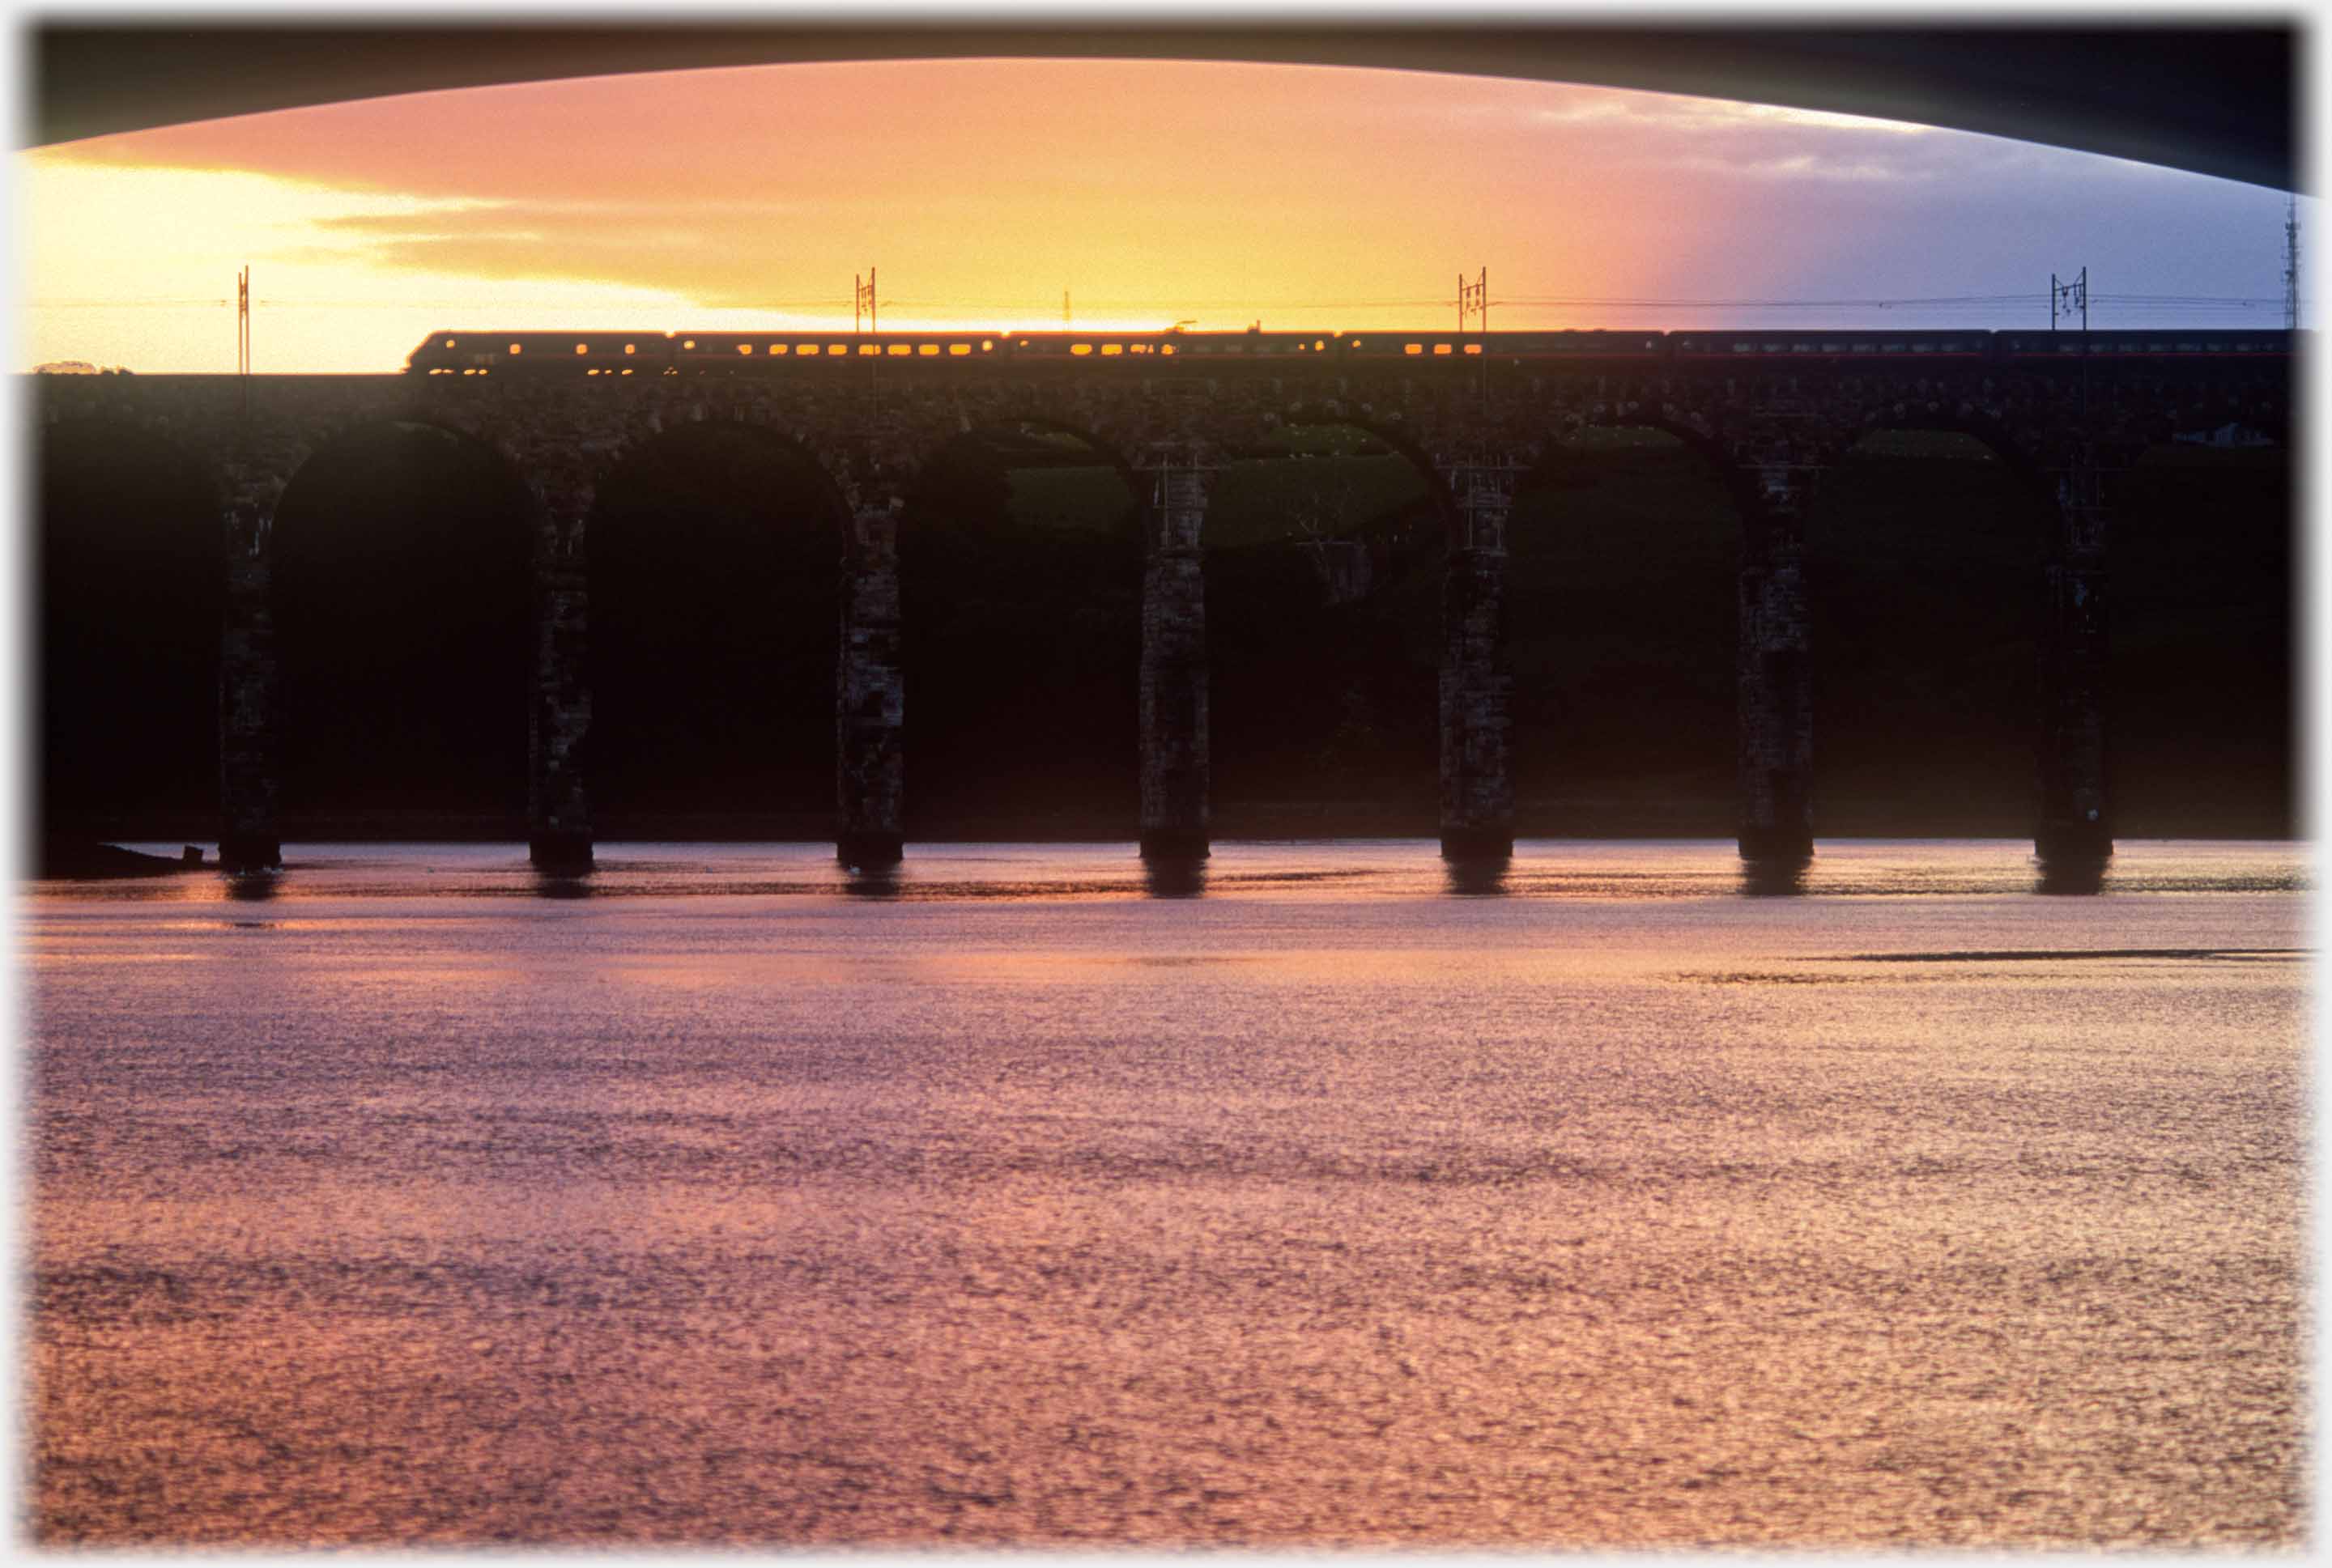 Silhouette of bridges in sunset with train passing over.